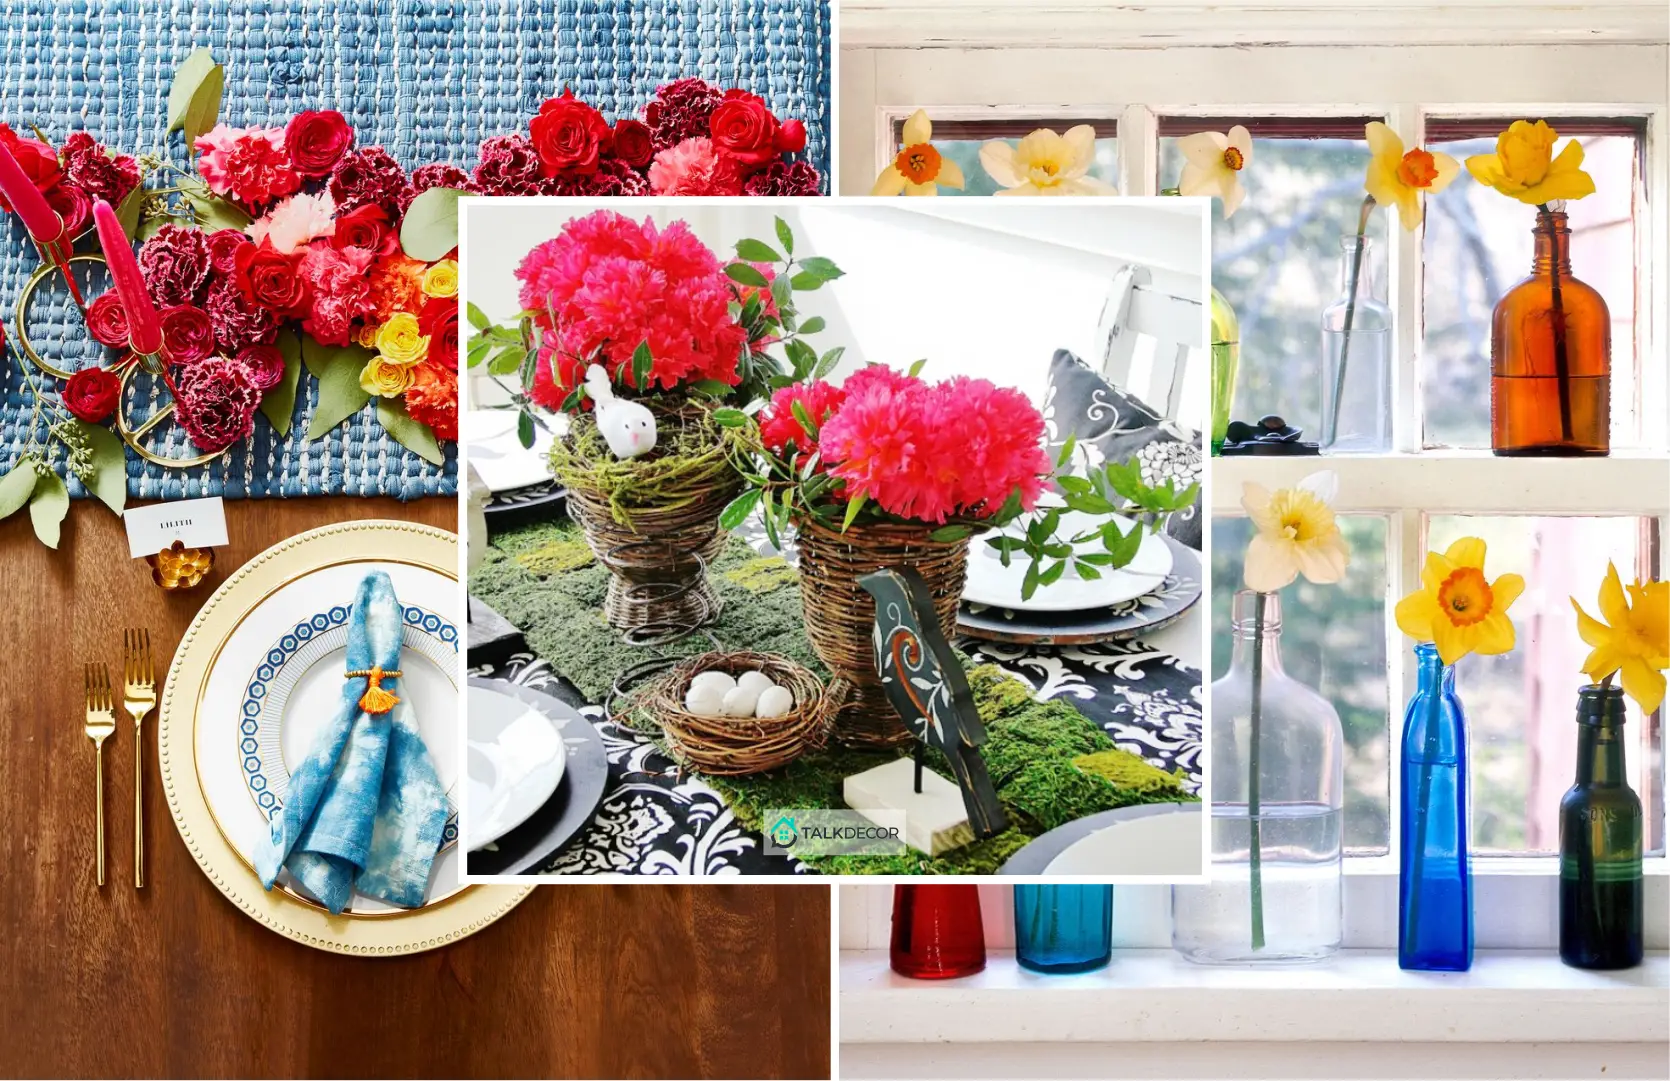 Adding On Budget Spring Touches to Your Home